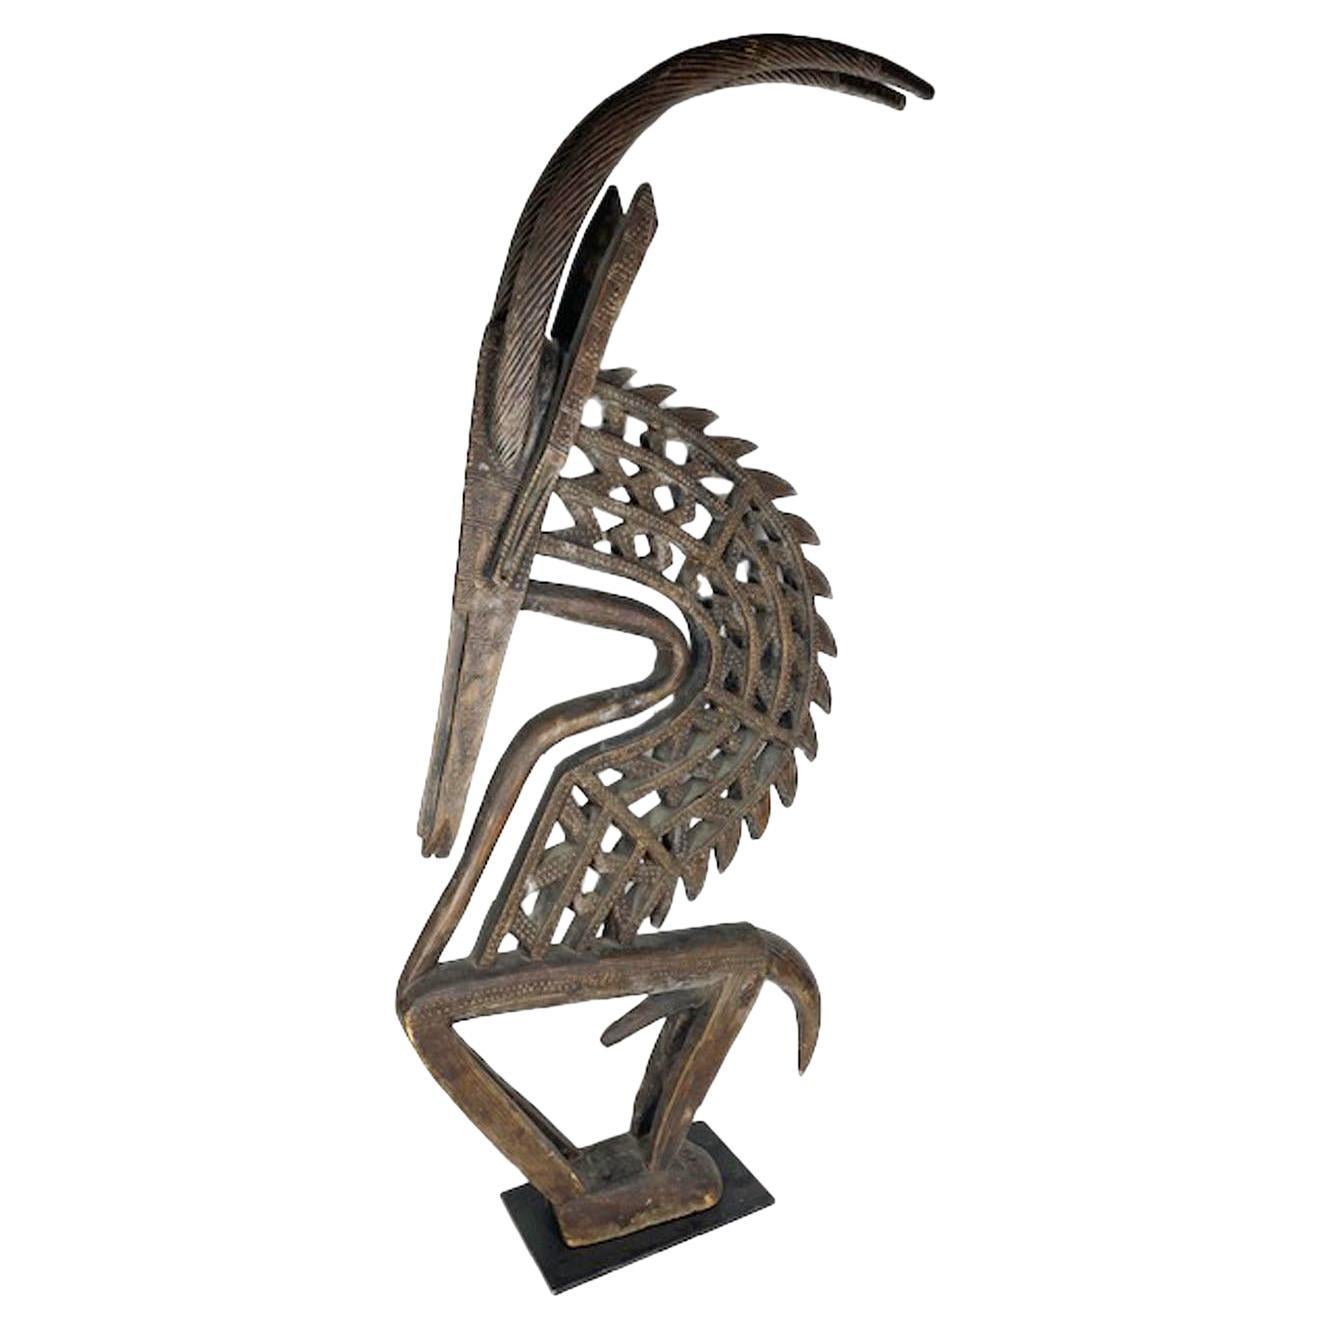 Chi wara is a ritual headdress used by the Bambara people in Mali. Portrayed as both male or female figures Chi ware is associated with agriculture. This large male example has a strong and striking cut-out triangular motif with large curved spiral